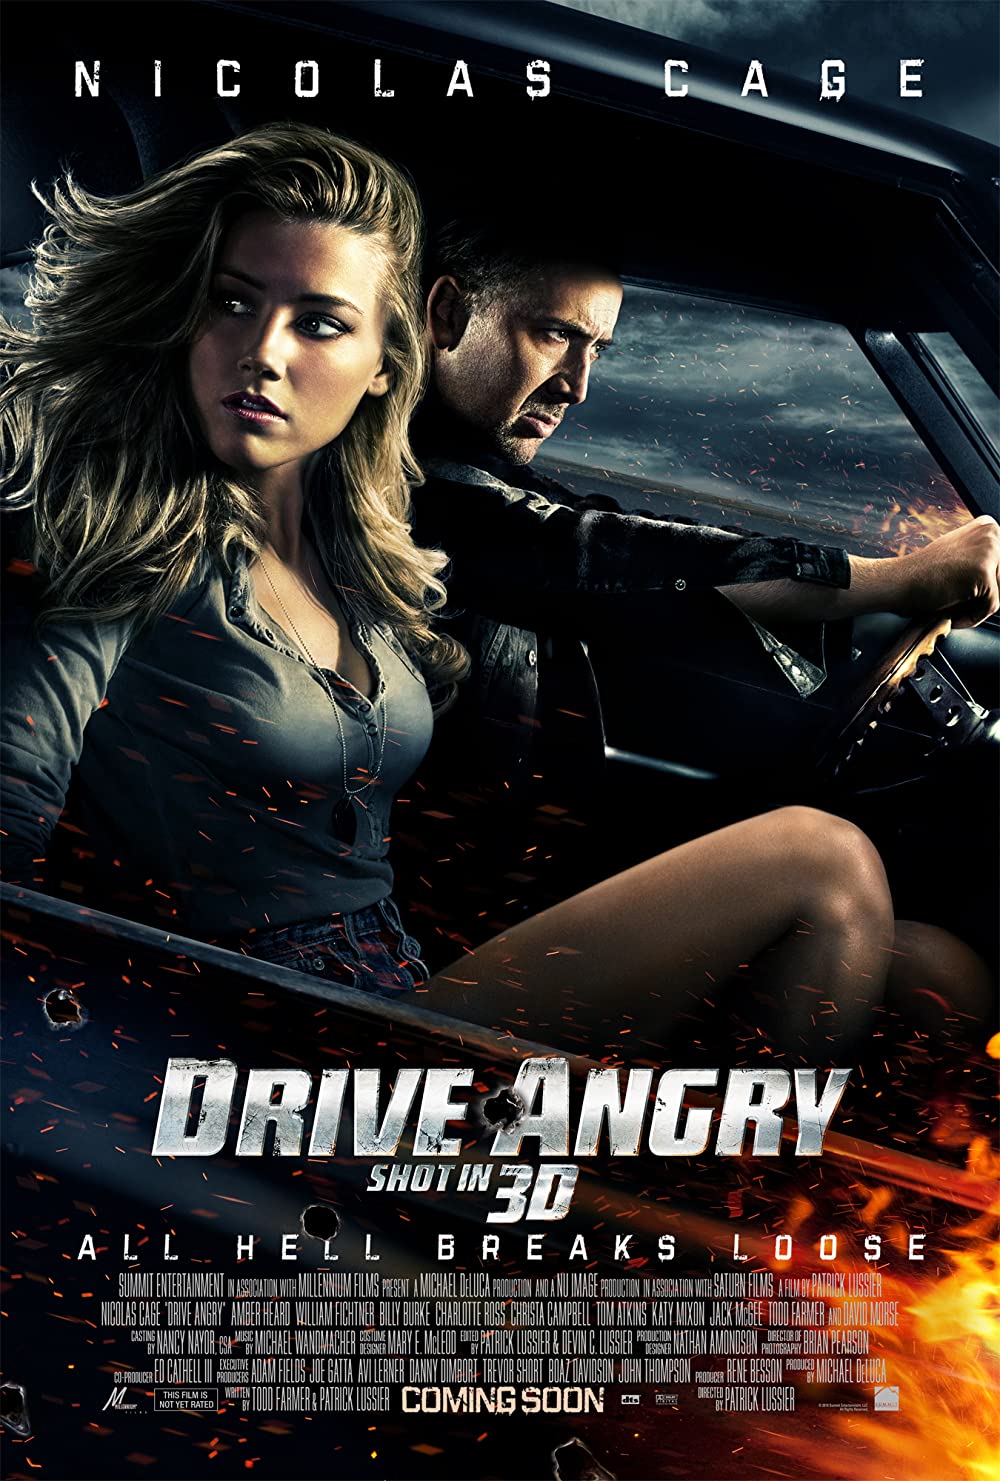 FULL MOVIE: Drive Angry (2011) [Action]